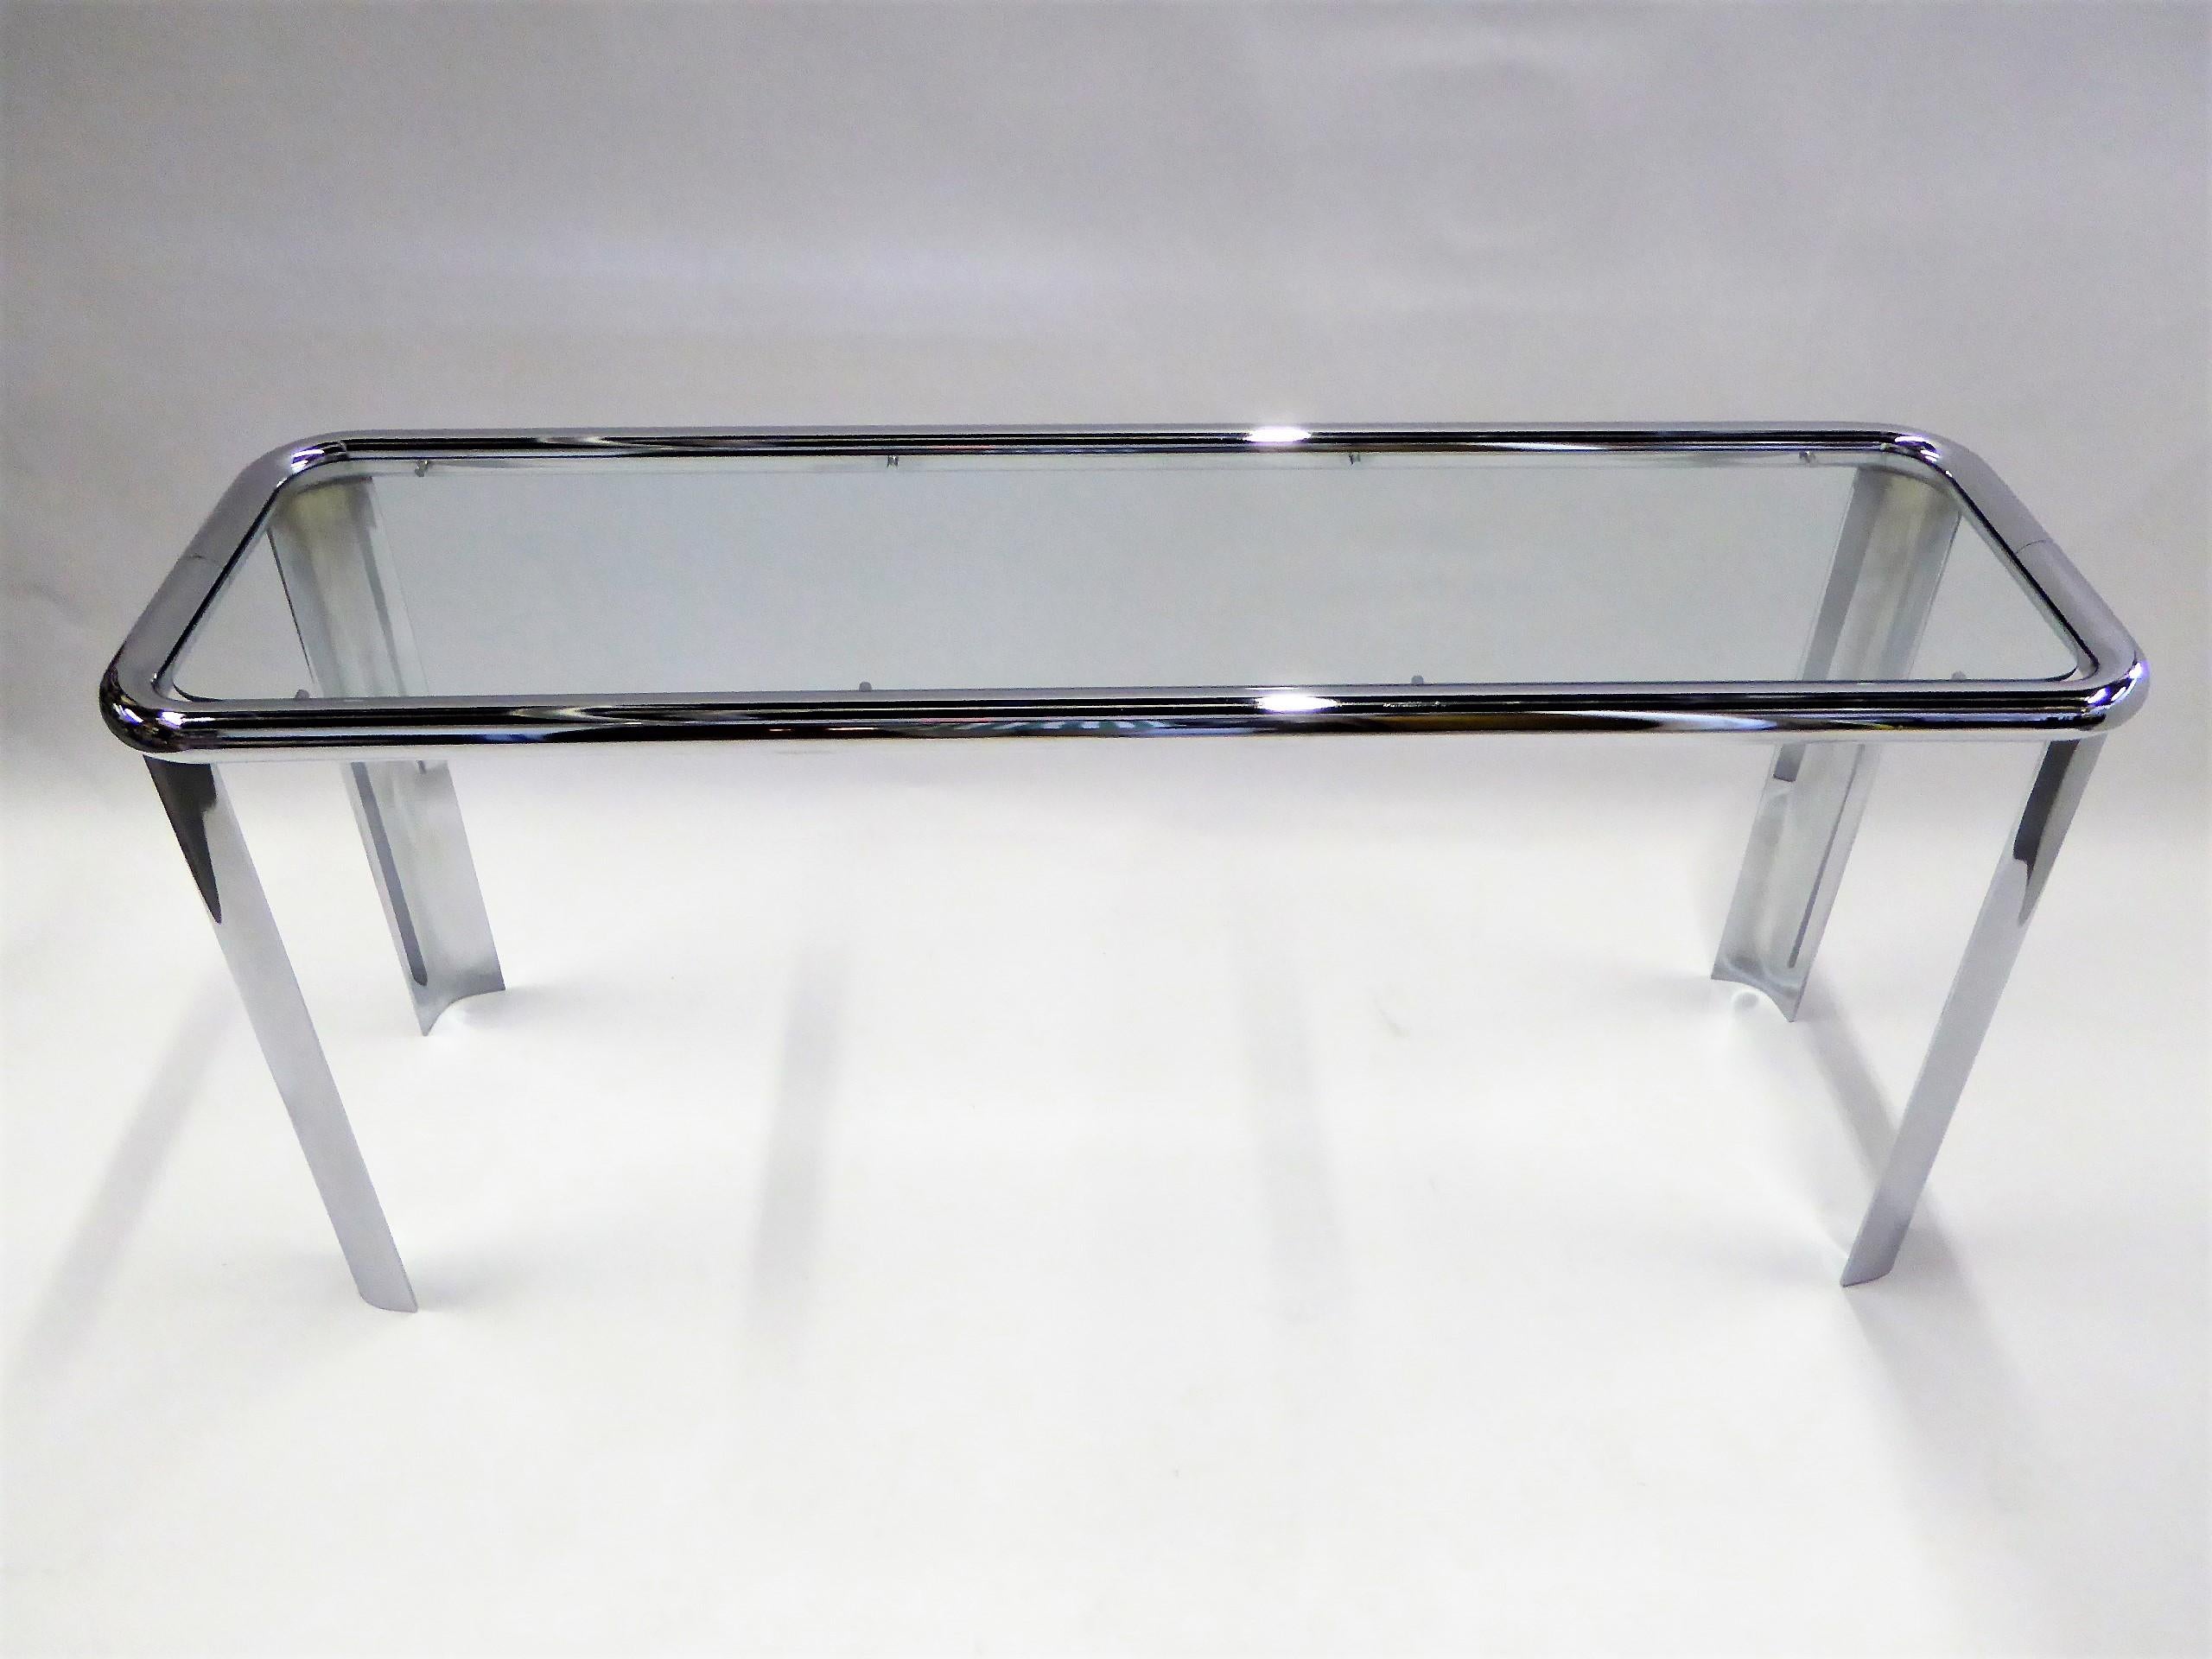 REDUCED FROM $2150....Spectacular 1970s tubular chrome race track console table with an inset glass top. Fat tubular top, the legs are quarter curve arc shaped. In very good condition with very slight oxidation on two legs (see pics). Very well